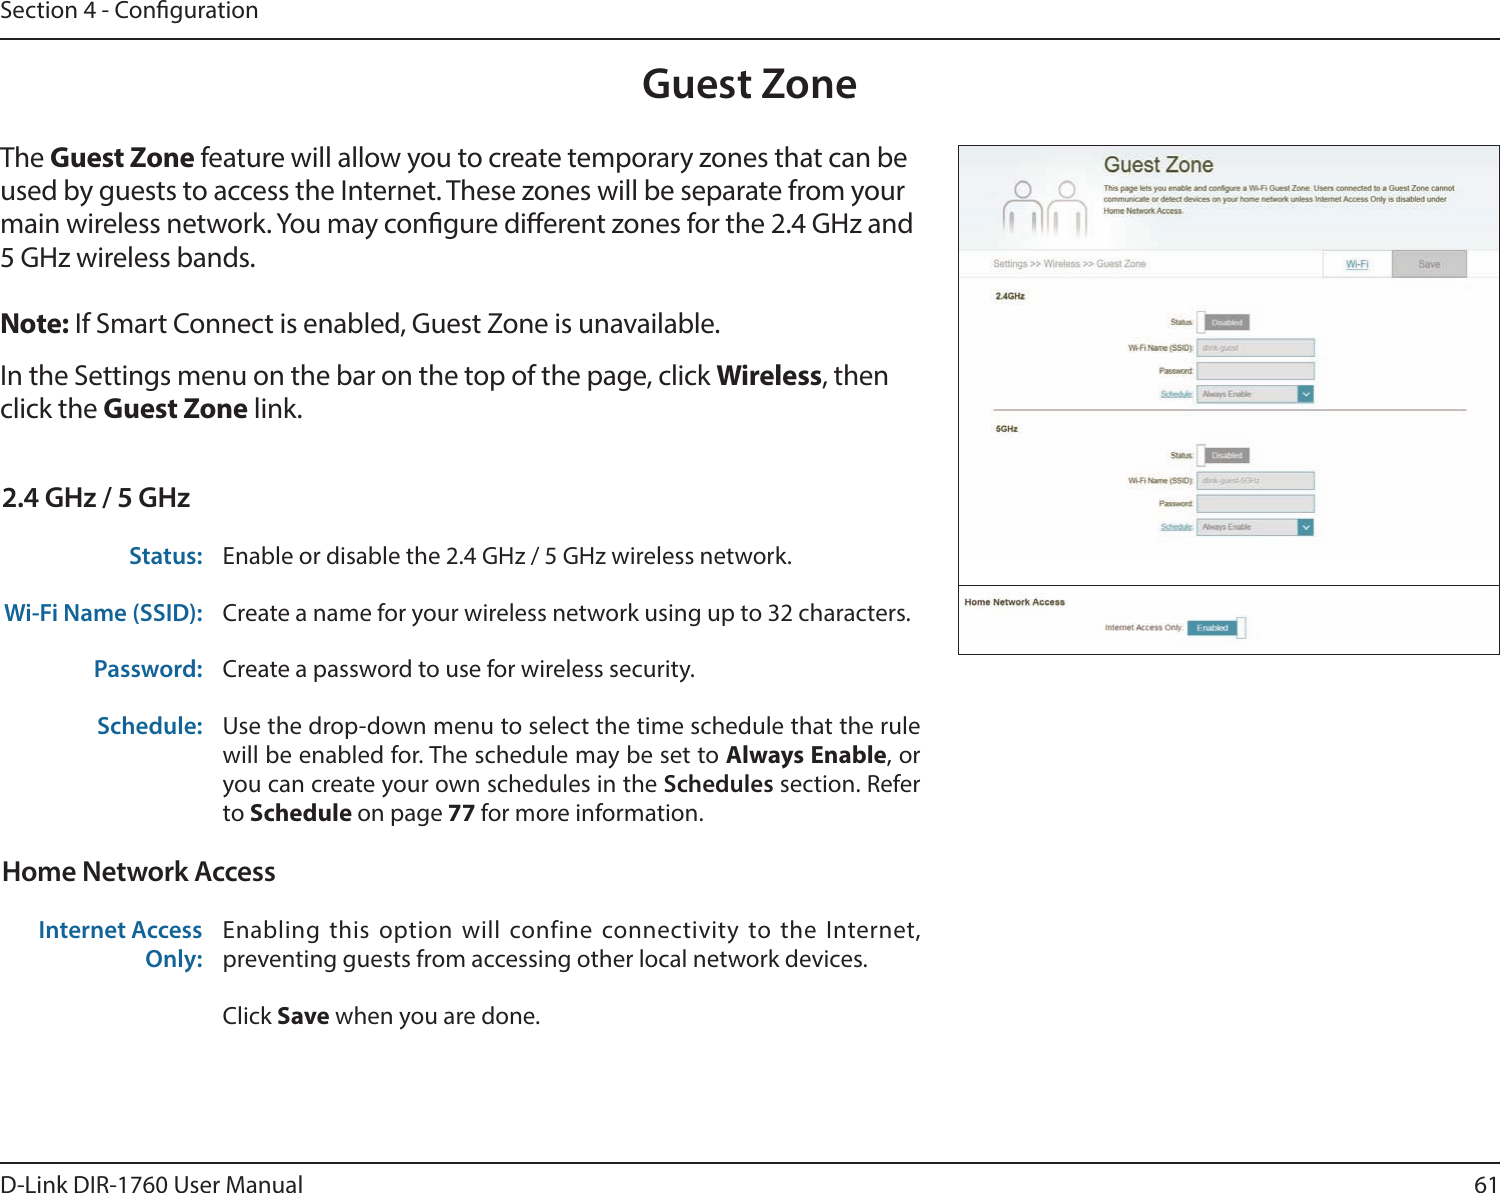 61D-Link DIR-1760 User ManualSection 4 - CongurationGuest ZoneIn the Settings menu on the bar on the top of the page, click Wireless, then click the Guest Zone link. The Guest Zone feature will allow you to create temporary zones that can be used by guests to access the Internet. These zones will be separate from your main wireless network. You may congure dierent zones for the 2.4 GHz and 5 GHz wireless bands.Note: If Smart Connect is enabled, Guest Zone is unavailable.2.4 GHz / 5 GHzStatus: Enable or disable the 2.4 GHz / 5 GHz wireless network.Wi-Fi Name (SSID): Create a name for your wireless network using up to 32 characters. Password: Create a password to use for wireless security. Schedule: Use the drop-down menu to select the time schedule that the rule will be enabled for. The schedule may be set to Always Enable, or you can create your own schedules in the Schedules section. Refer to Schedule on page 77 for more information.Home Network AccessInternet Access Only:Enabling this option will confine connectivity to the Internet, preventing guests from accessing other local network devices.Click Save when you are done.